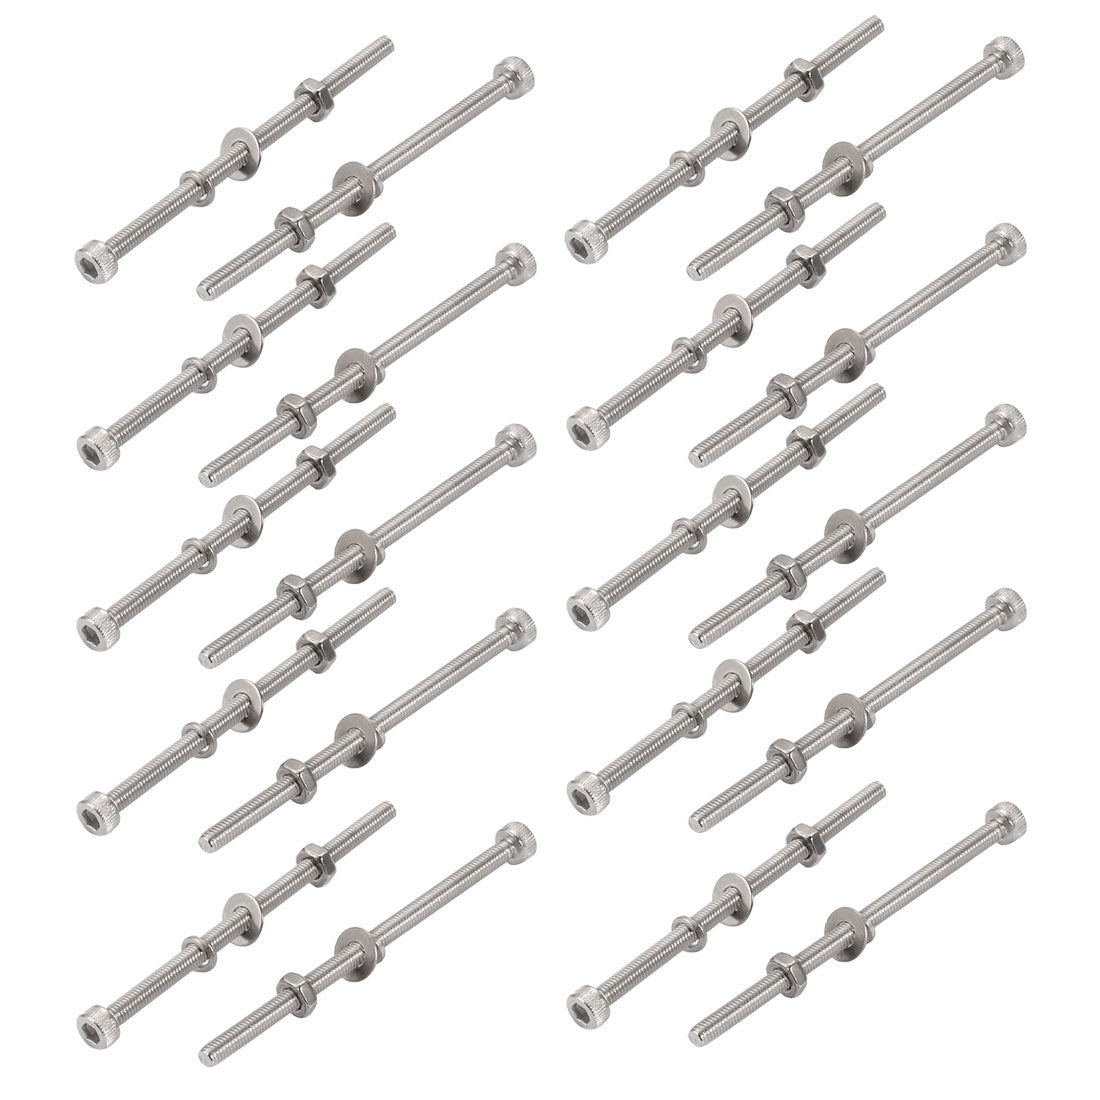 uxcell Uxcell 20Pcs M3x60mm 304 Stainless Steel Knurled Hex Socket Head Bolt Nut Set w Washer